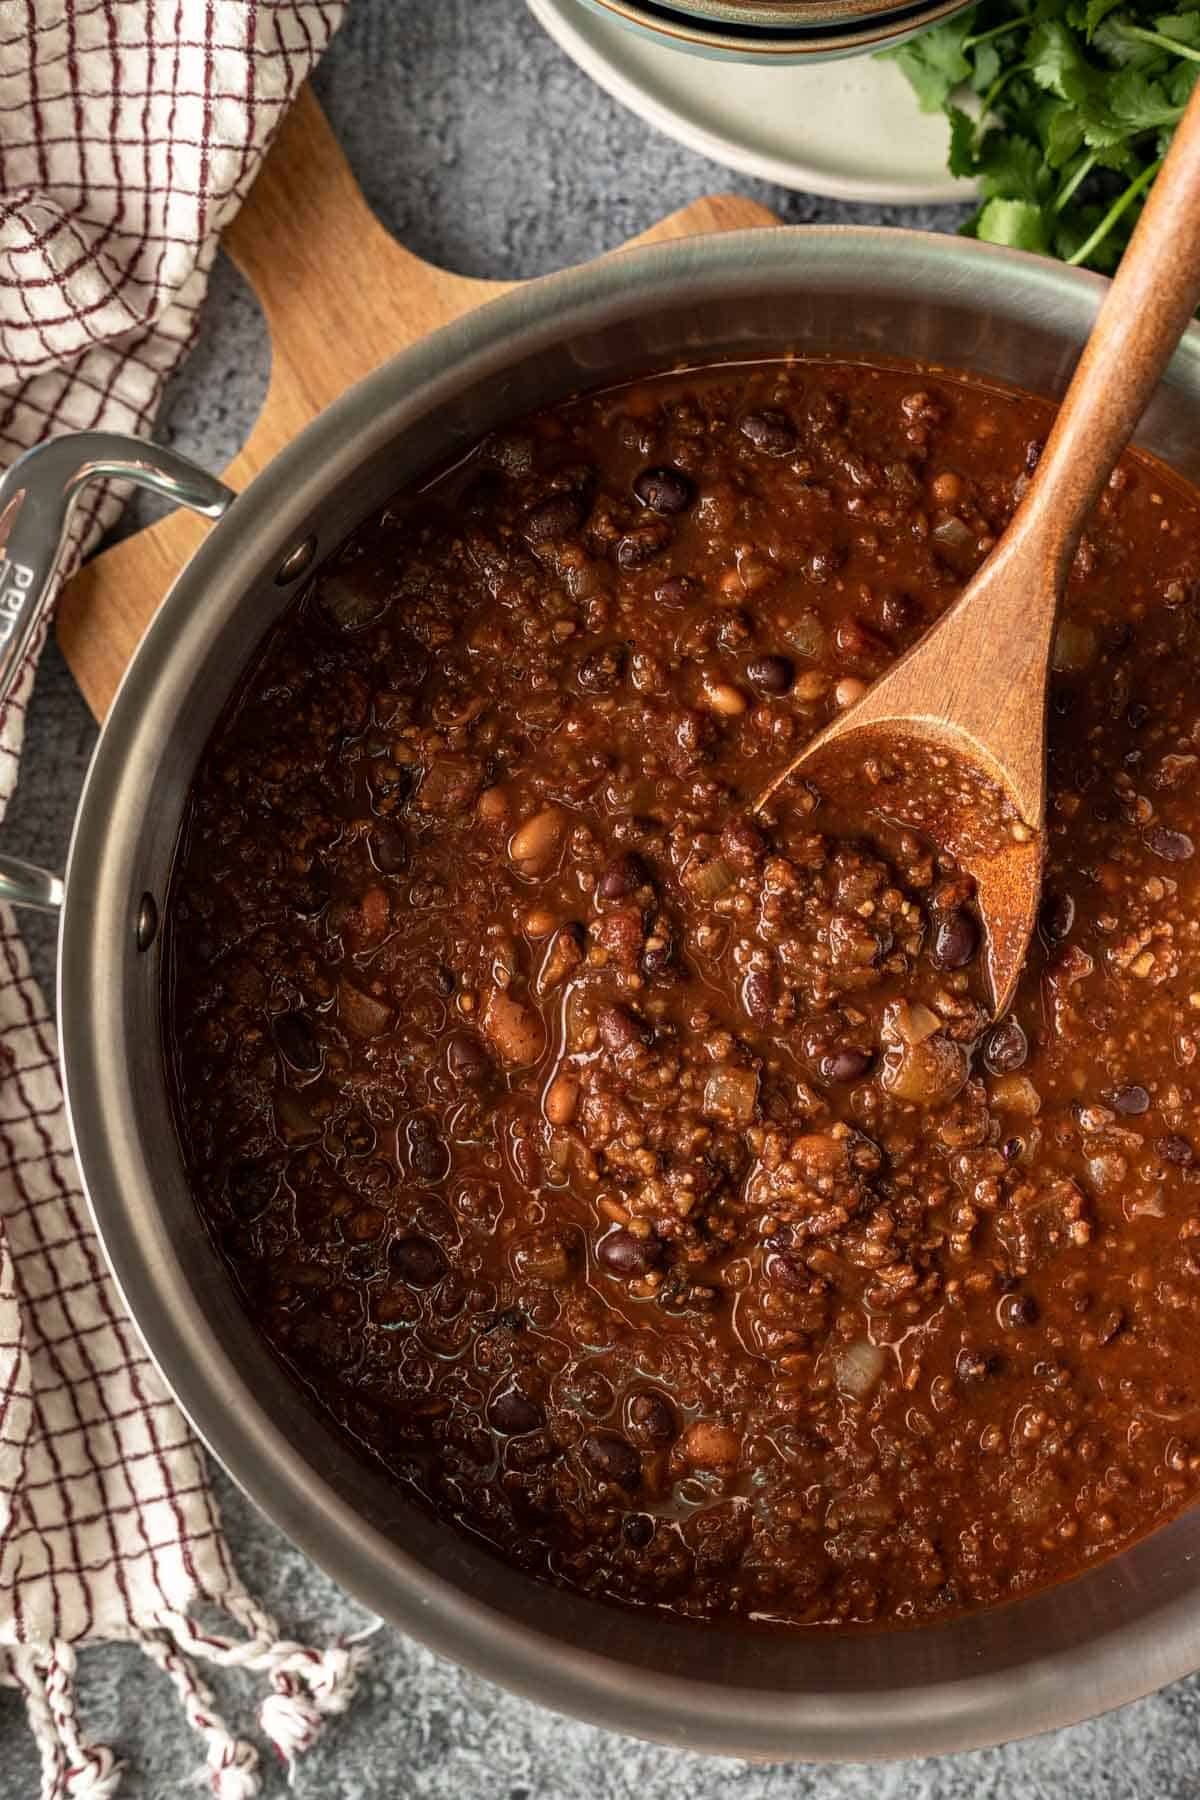 Close up of chili in a stainless pot showing the texture of bulgur, beans, and ground walnuts.